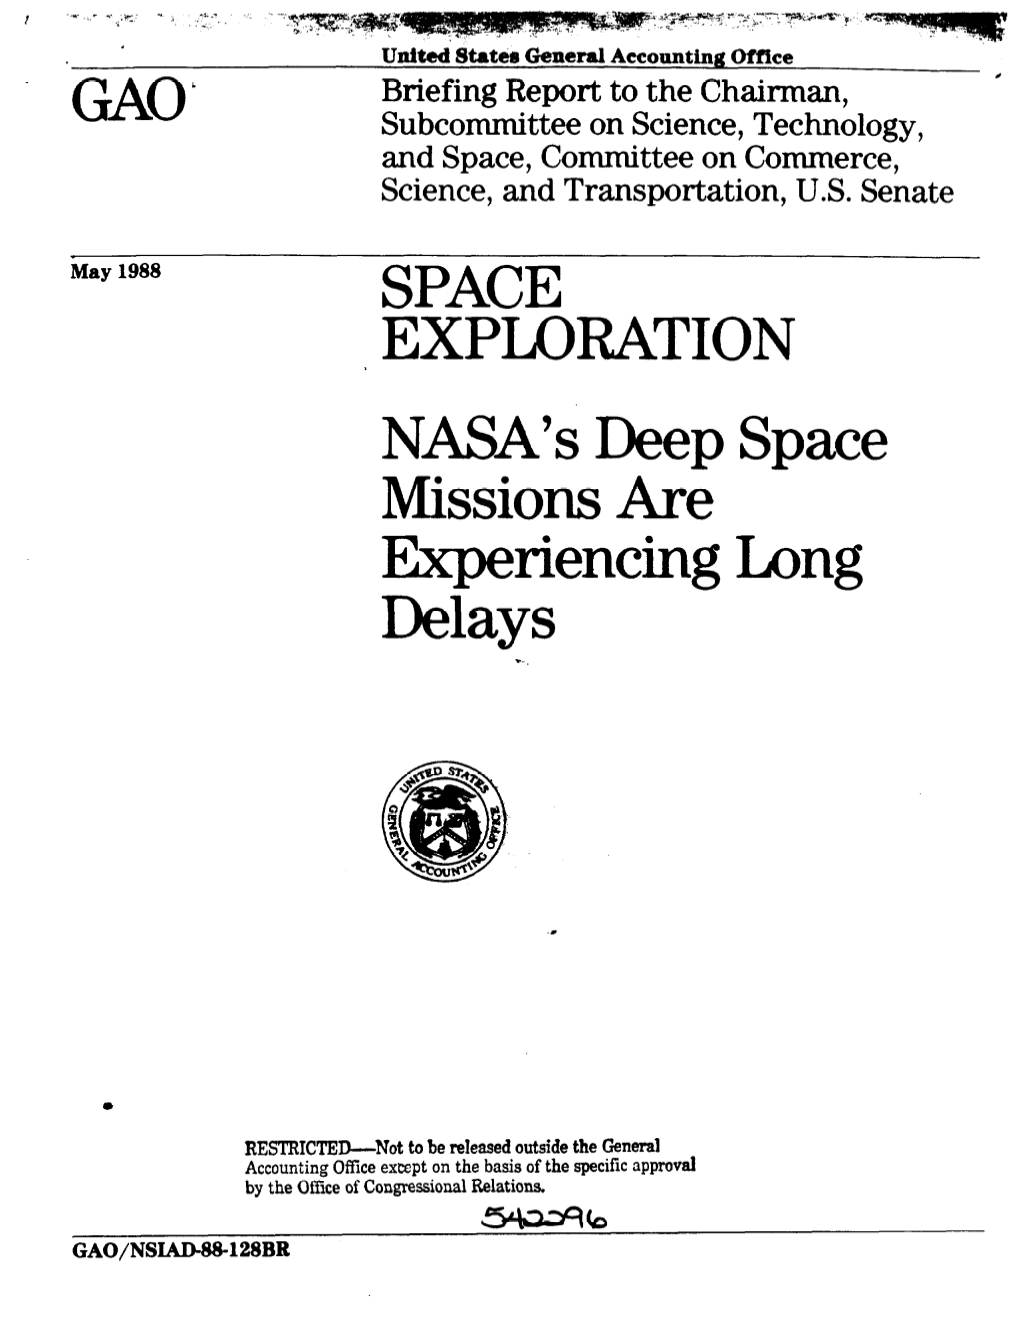 NSIAD-88-128BR Space Exploration: NASA's Deep Space Missions Are